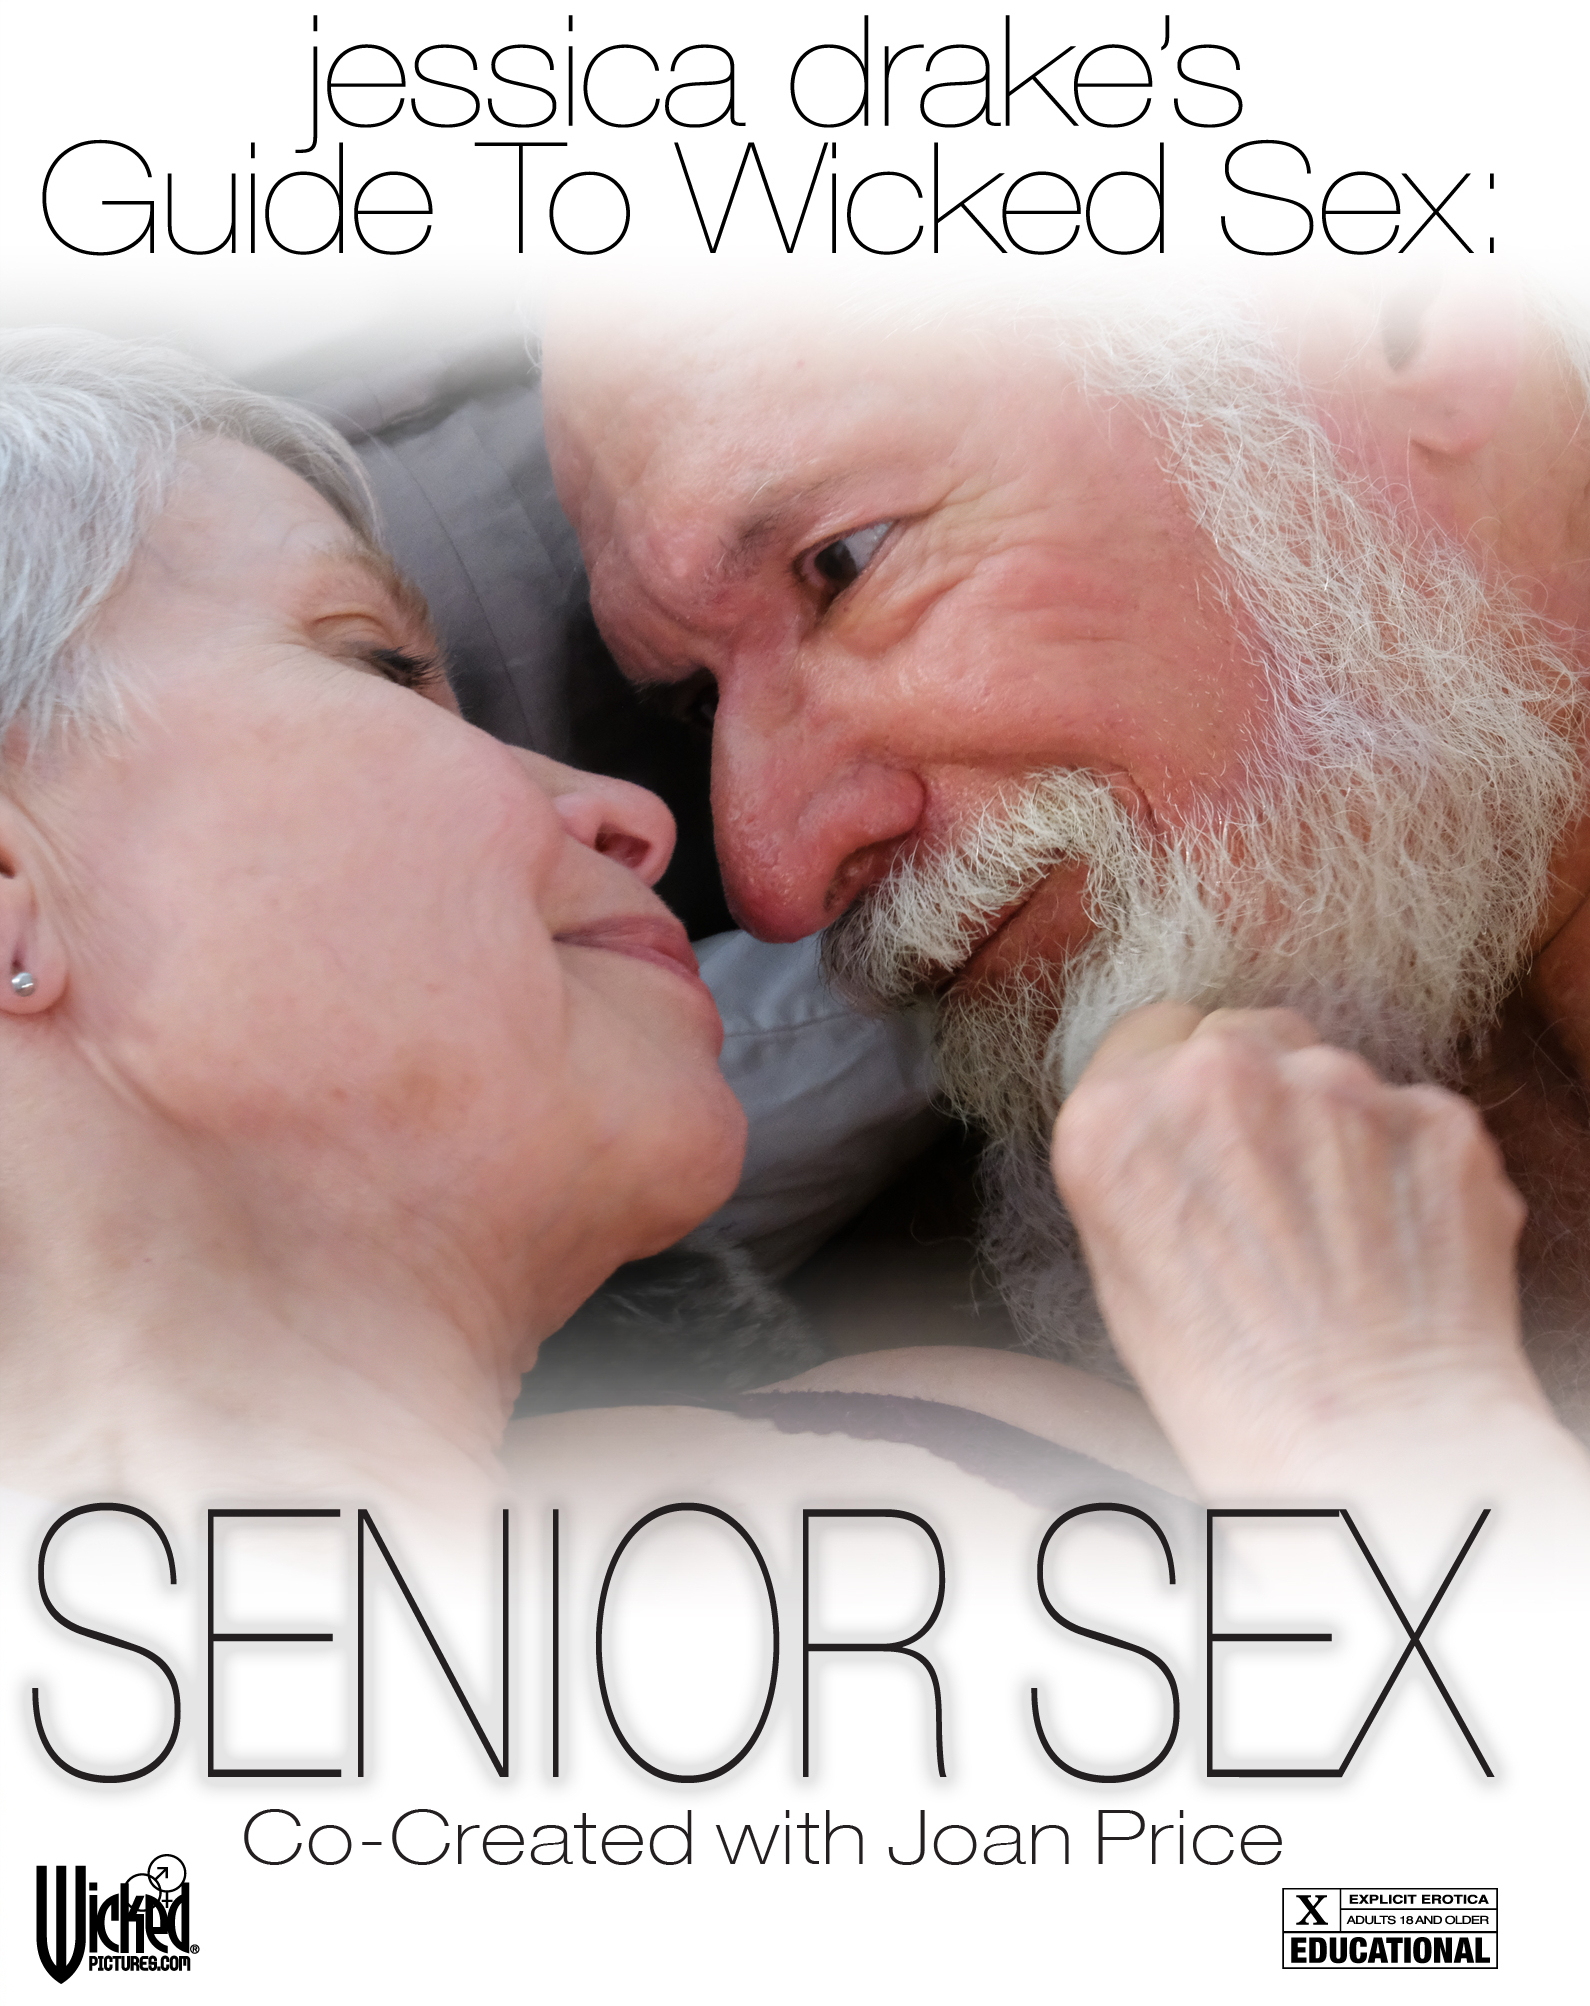 WICKED SENSUAL CARE’s JESSICA DRAKE Featured in The New York Times Magazine Cover Story ‘The Joys (and Challenges) of Sex After 70’